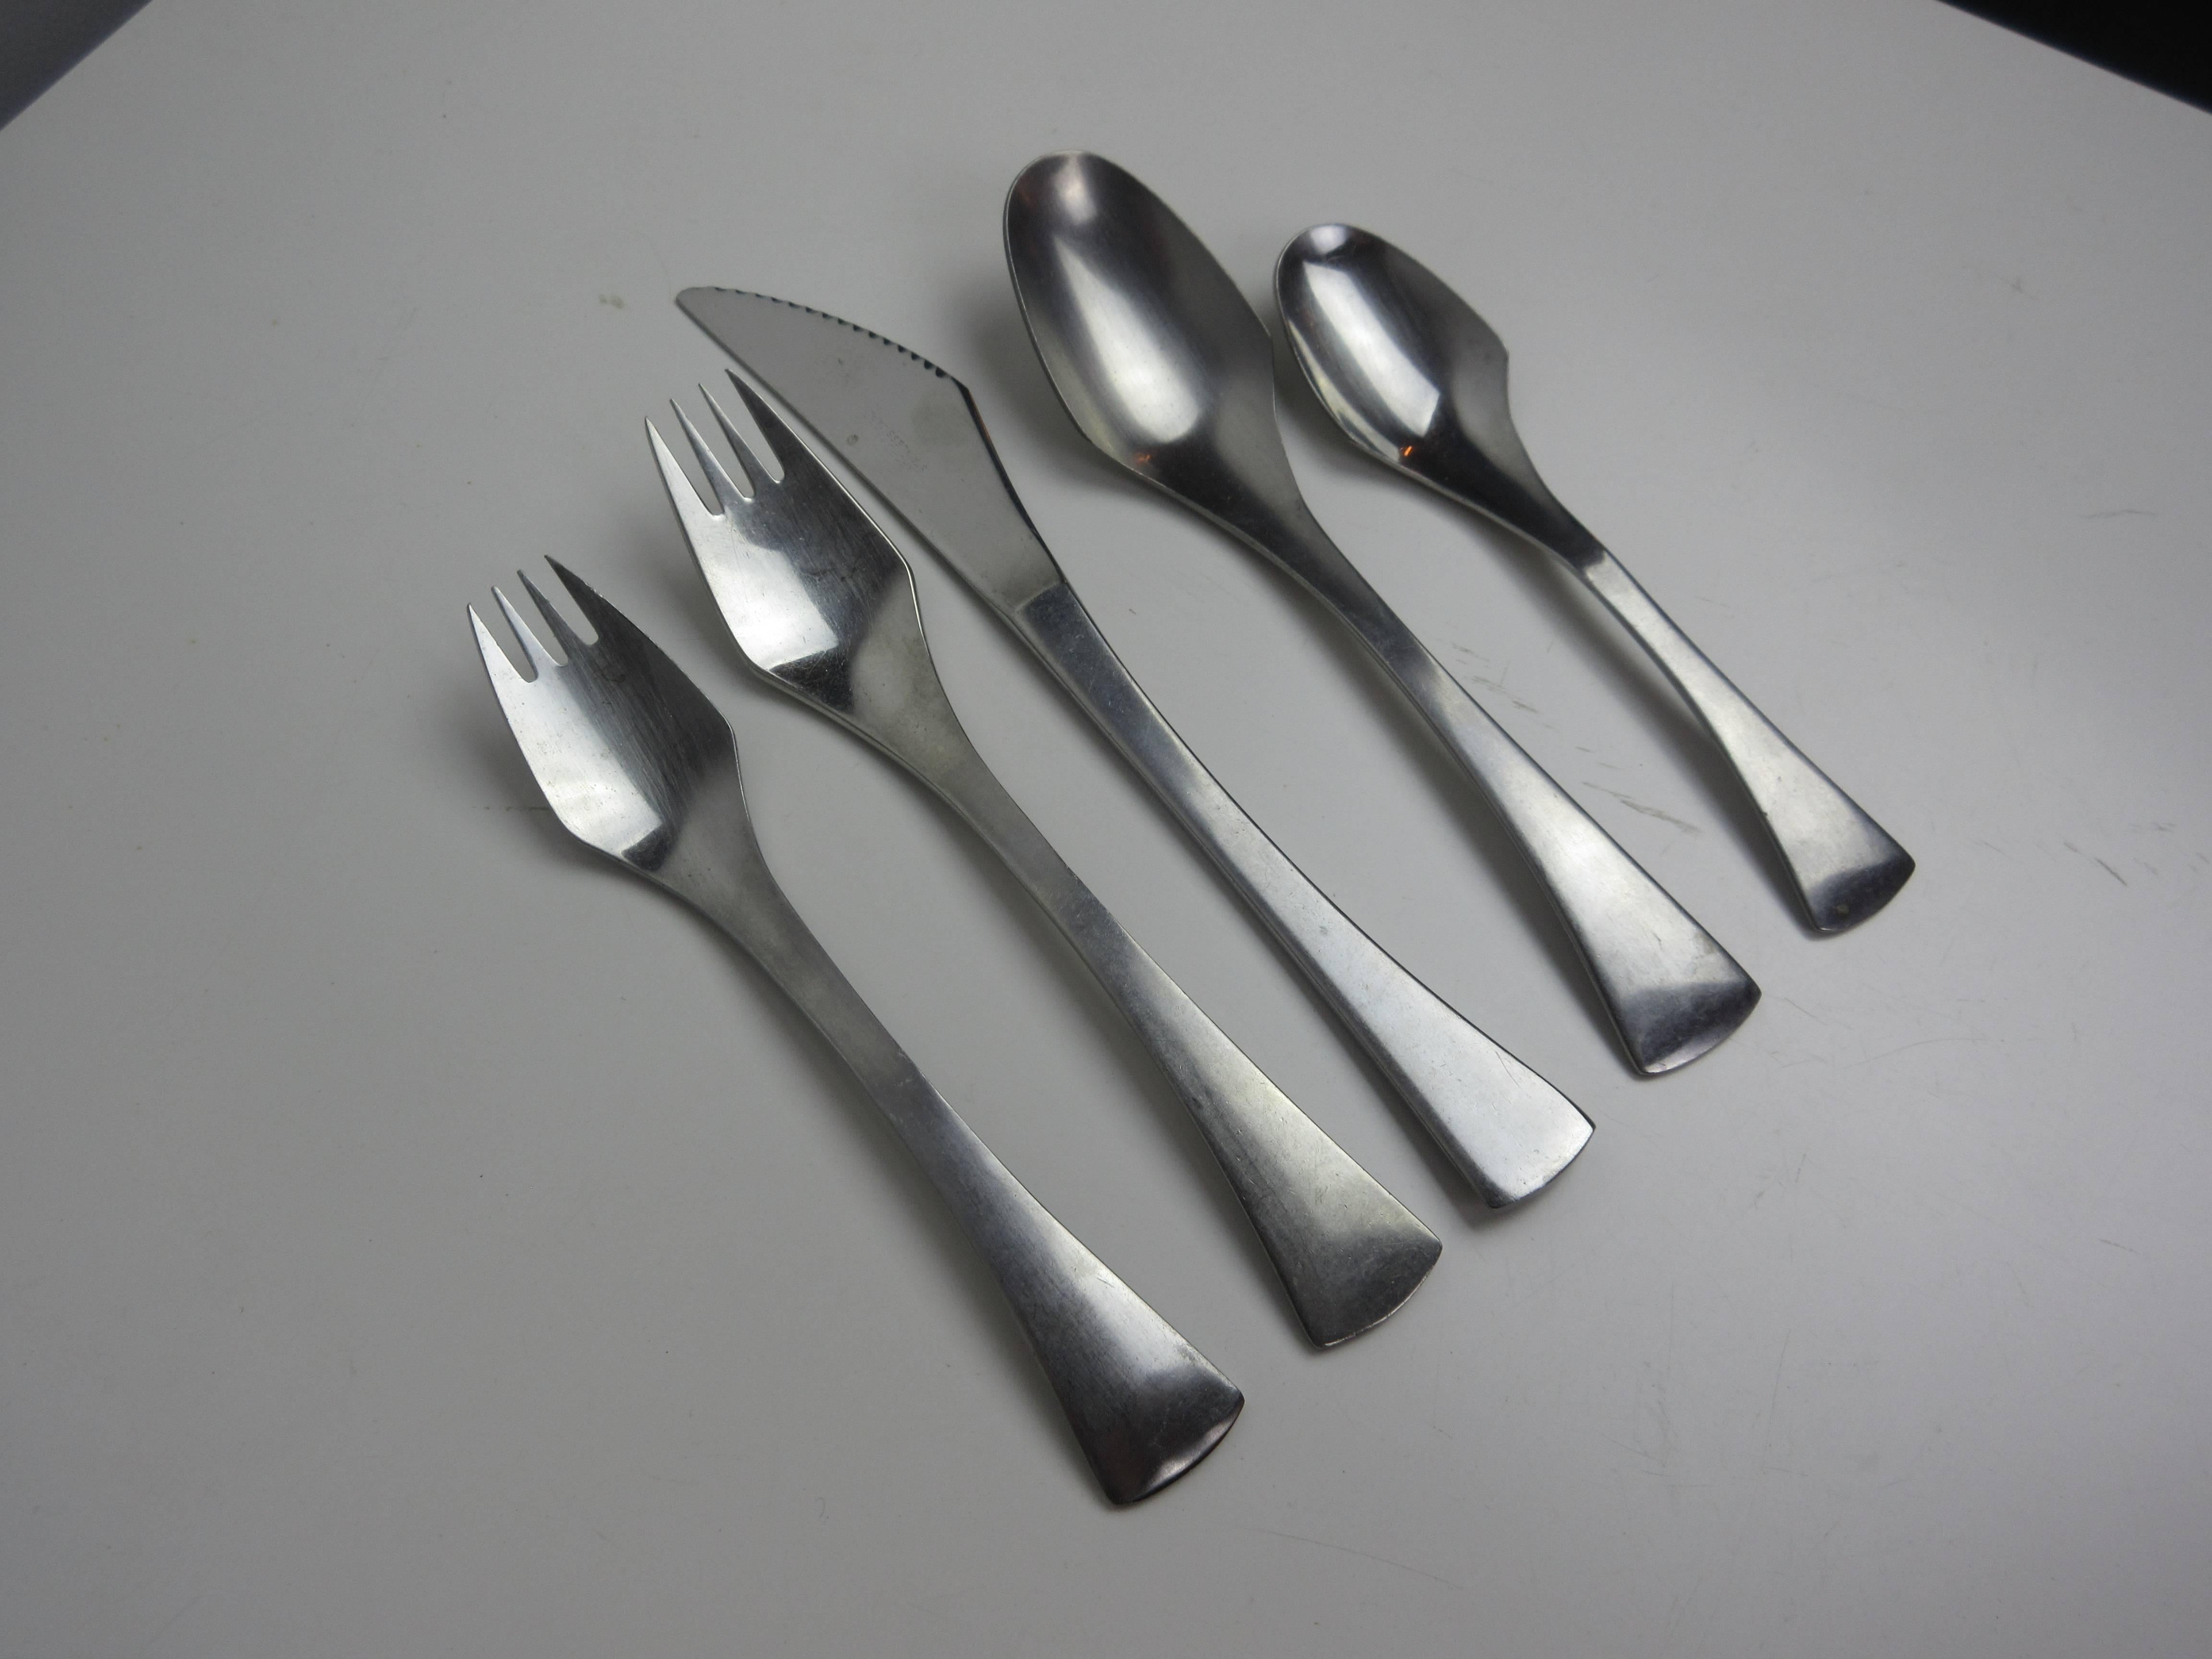 1960s designed stainless set produced by Oxford Hall.